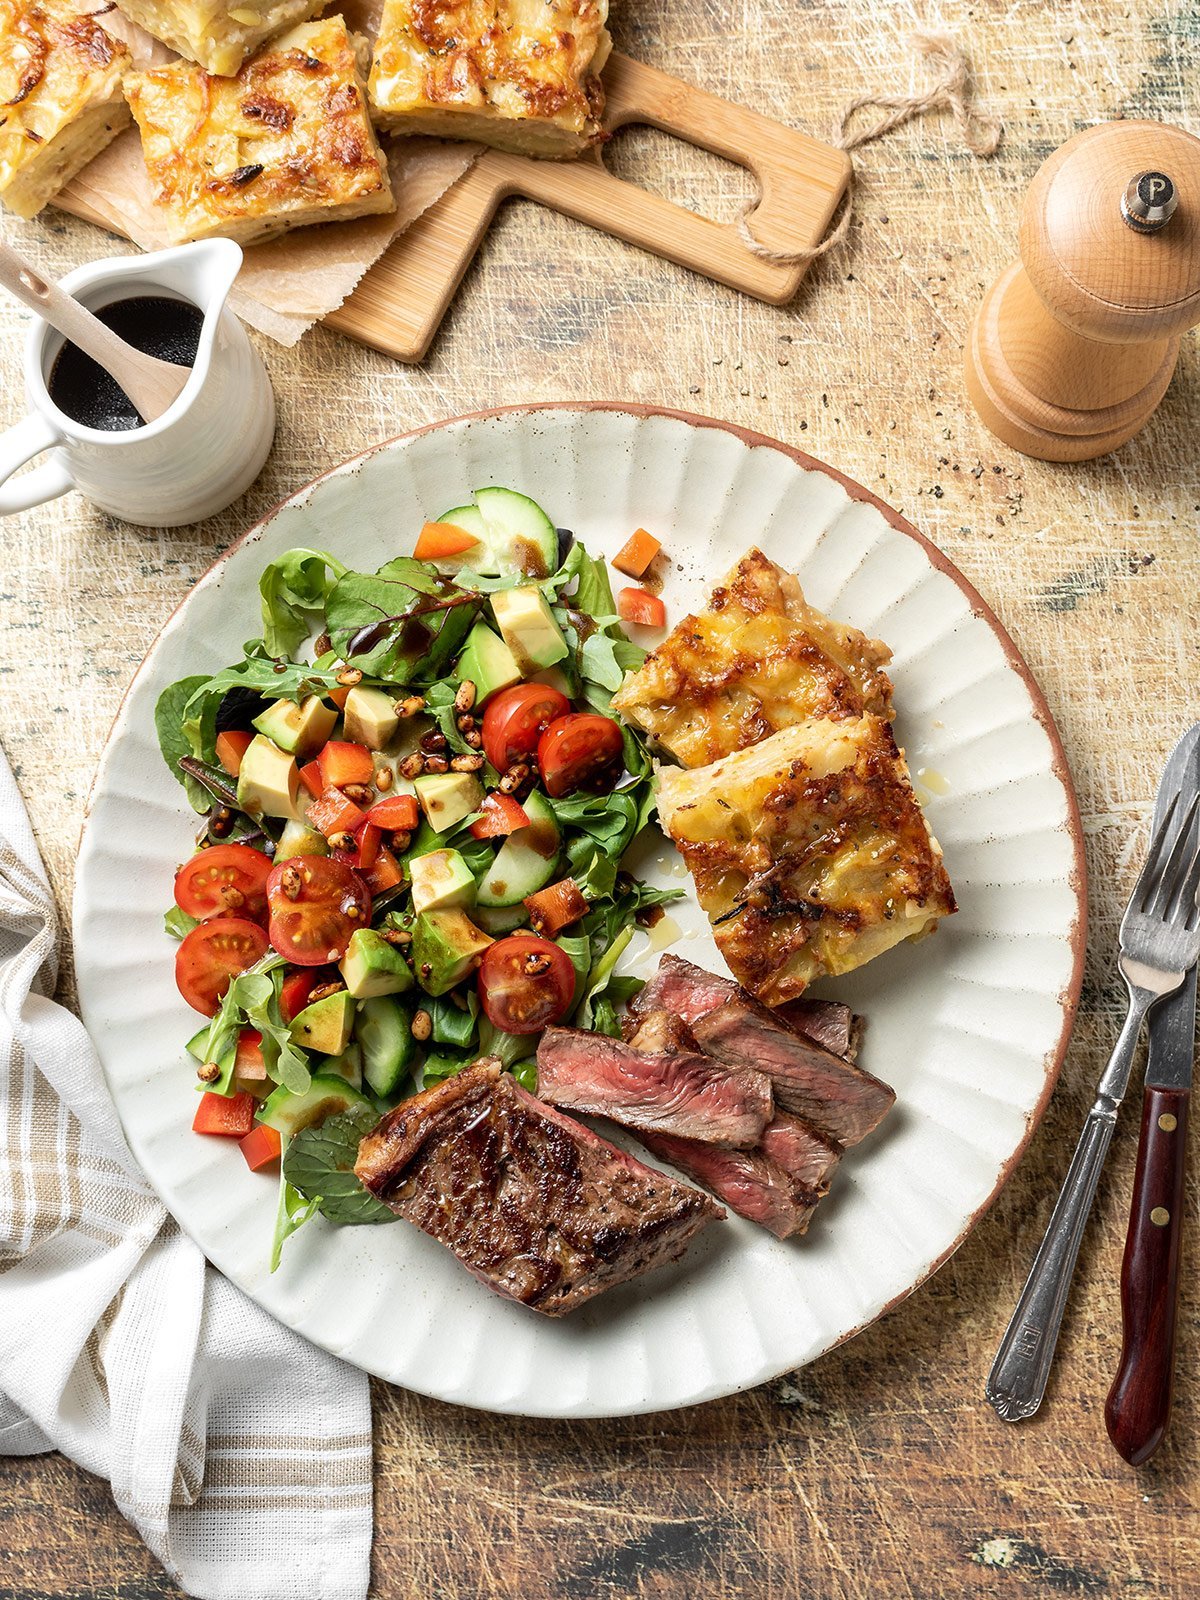 French onion potato bake with steak and salad.